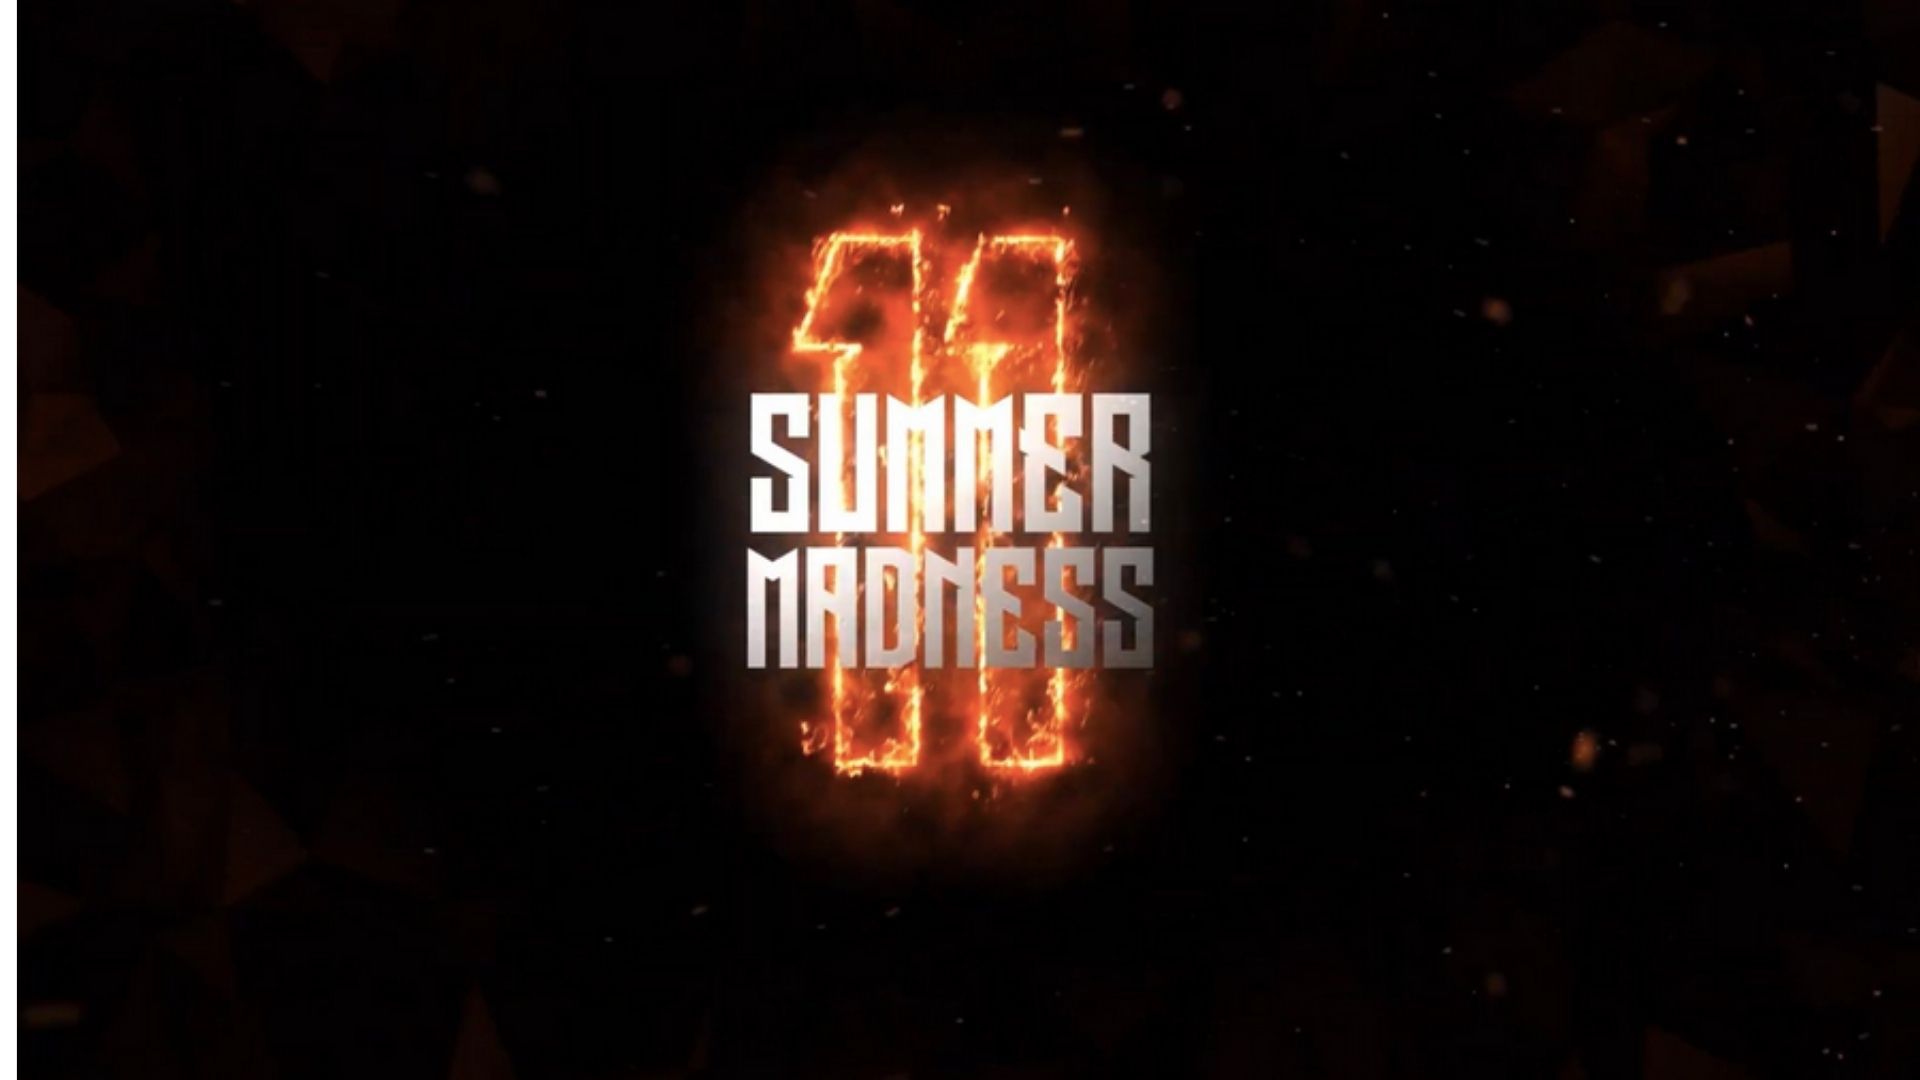 The Big Stage is Back!  The URL Announces Summer Madness 11 & Its Return to Houston